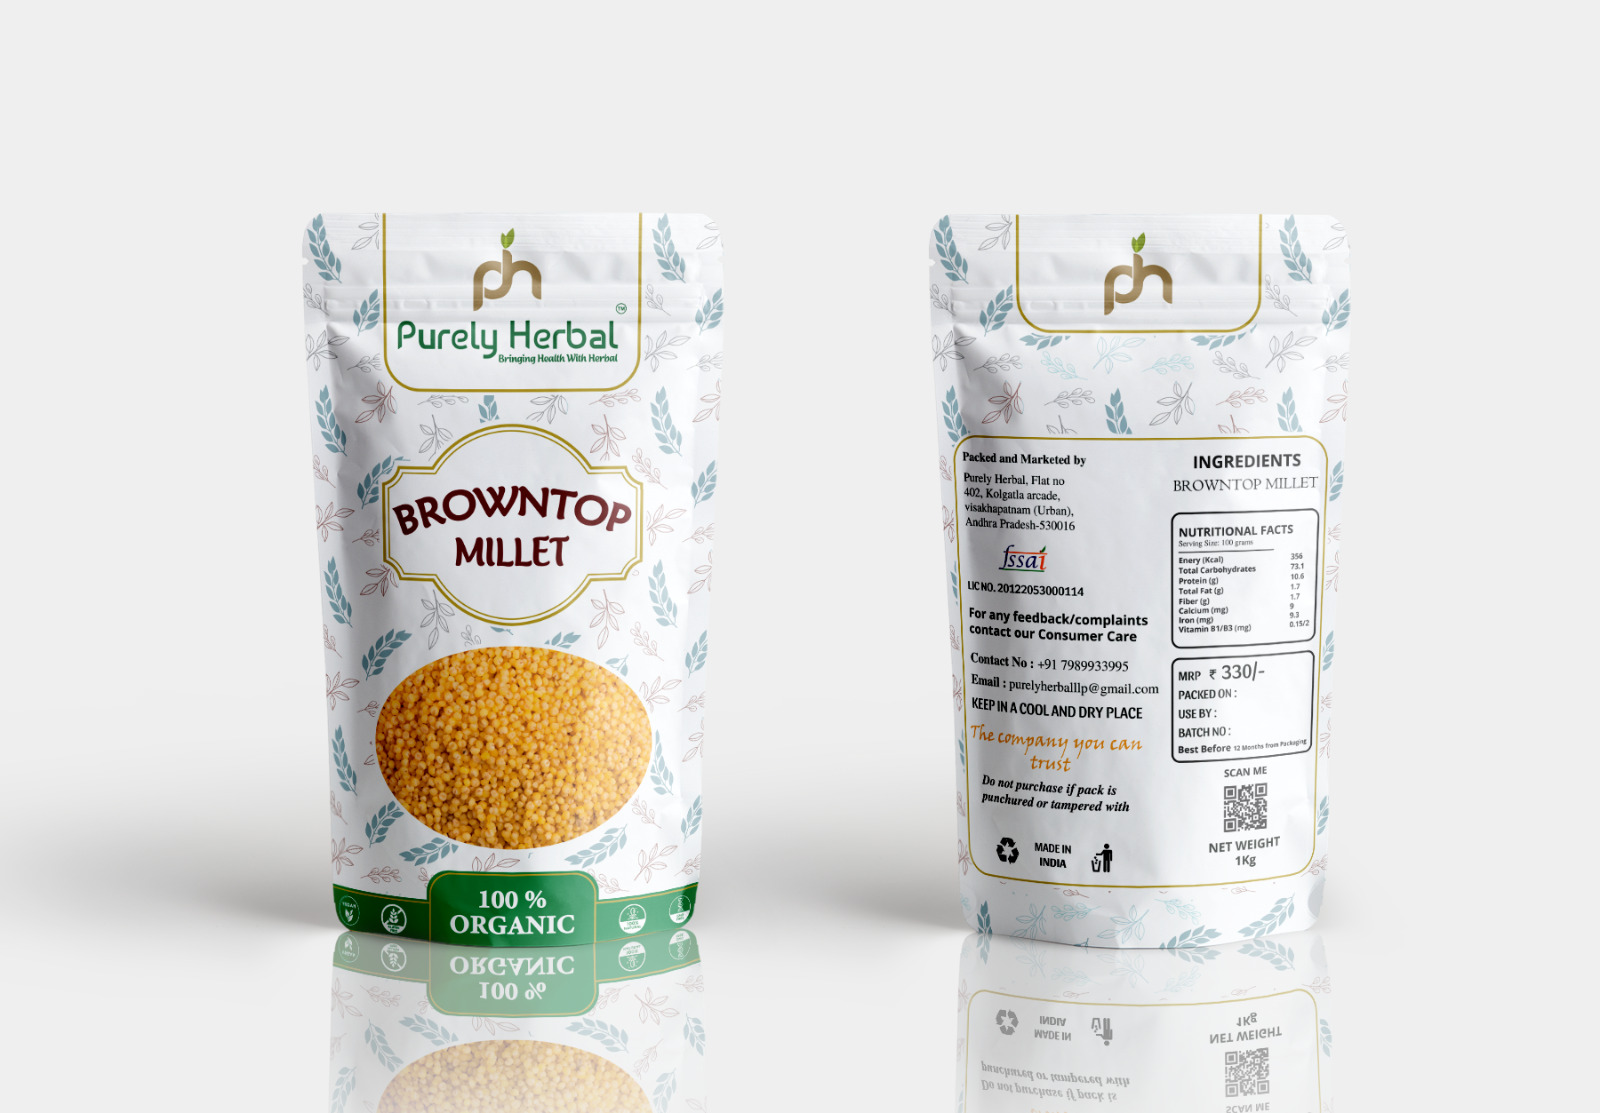 Purely Herbal Browntop Millets